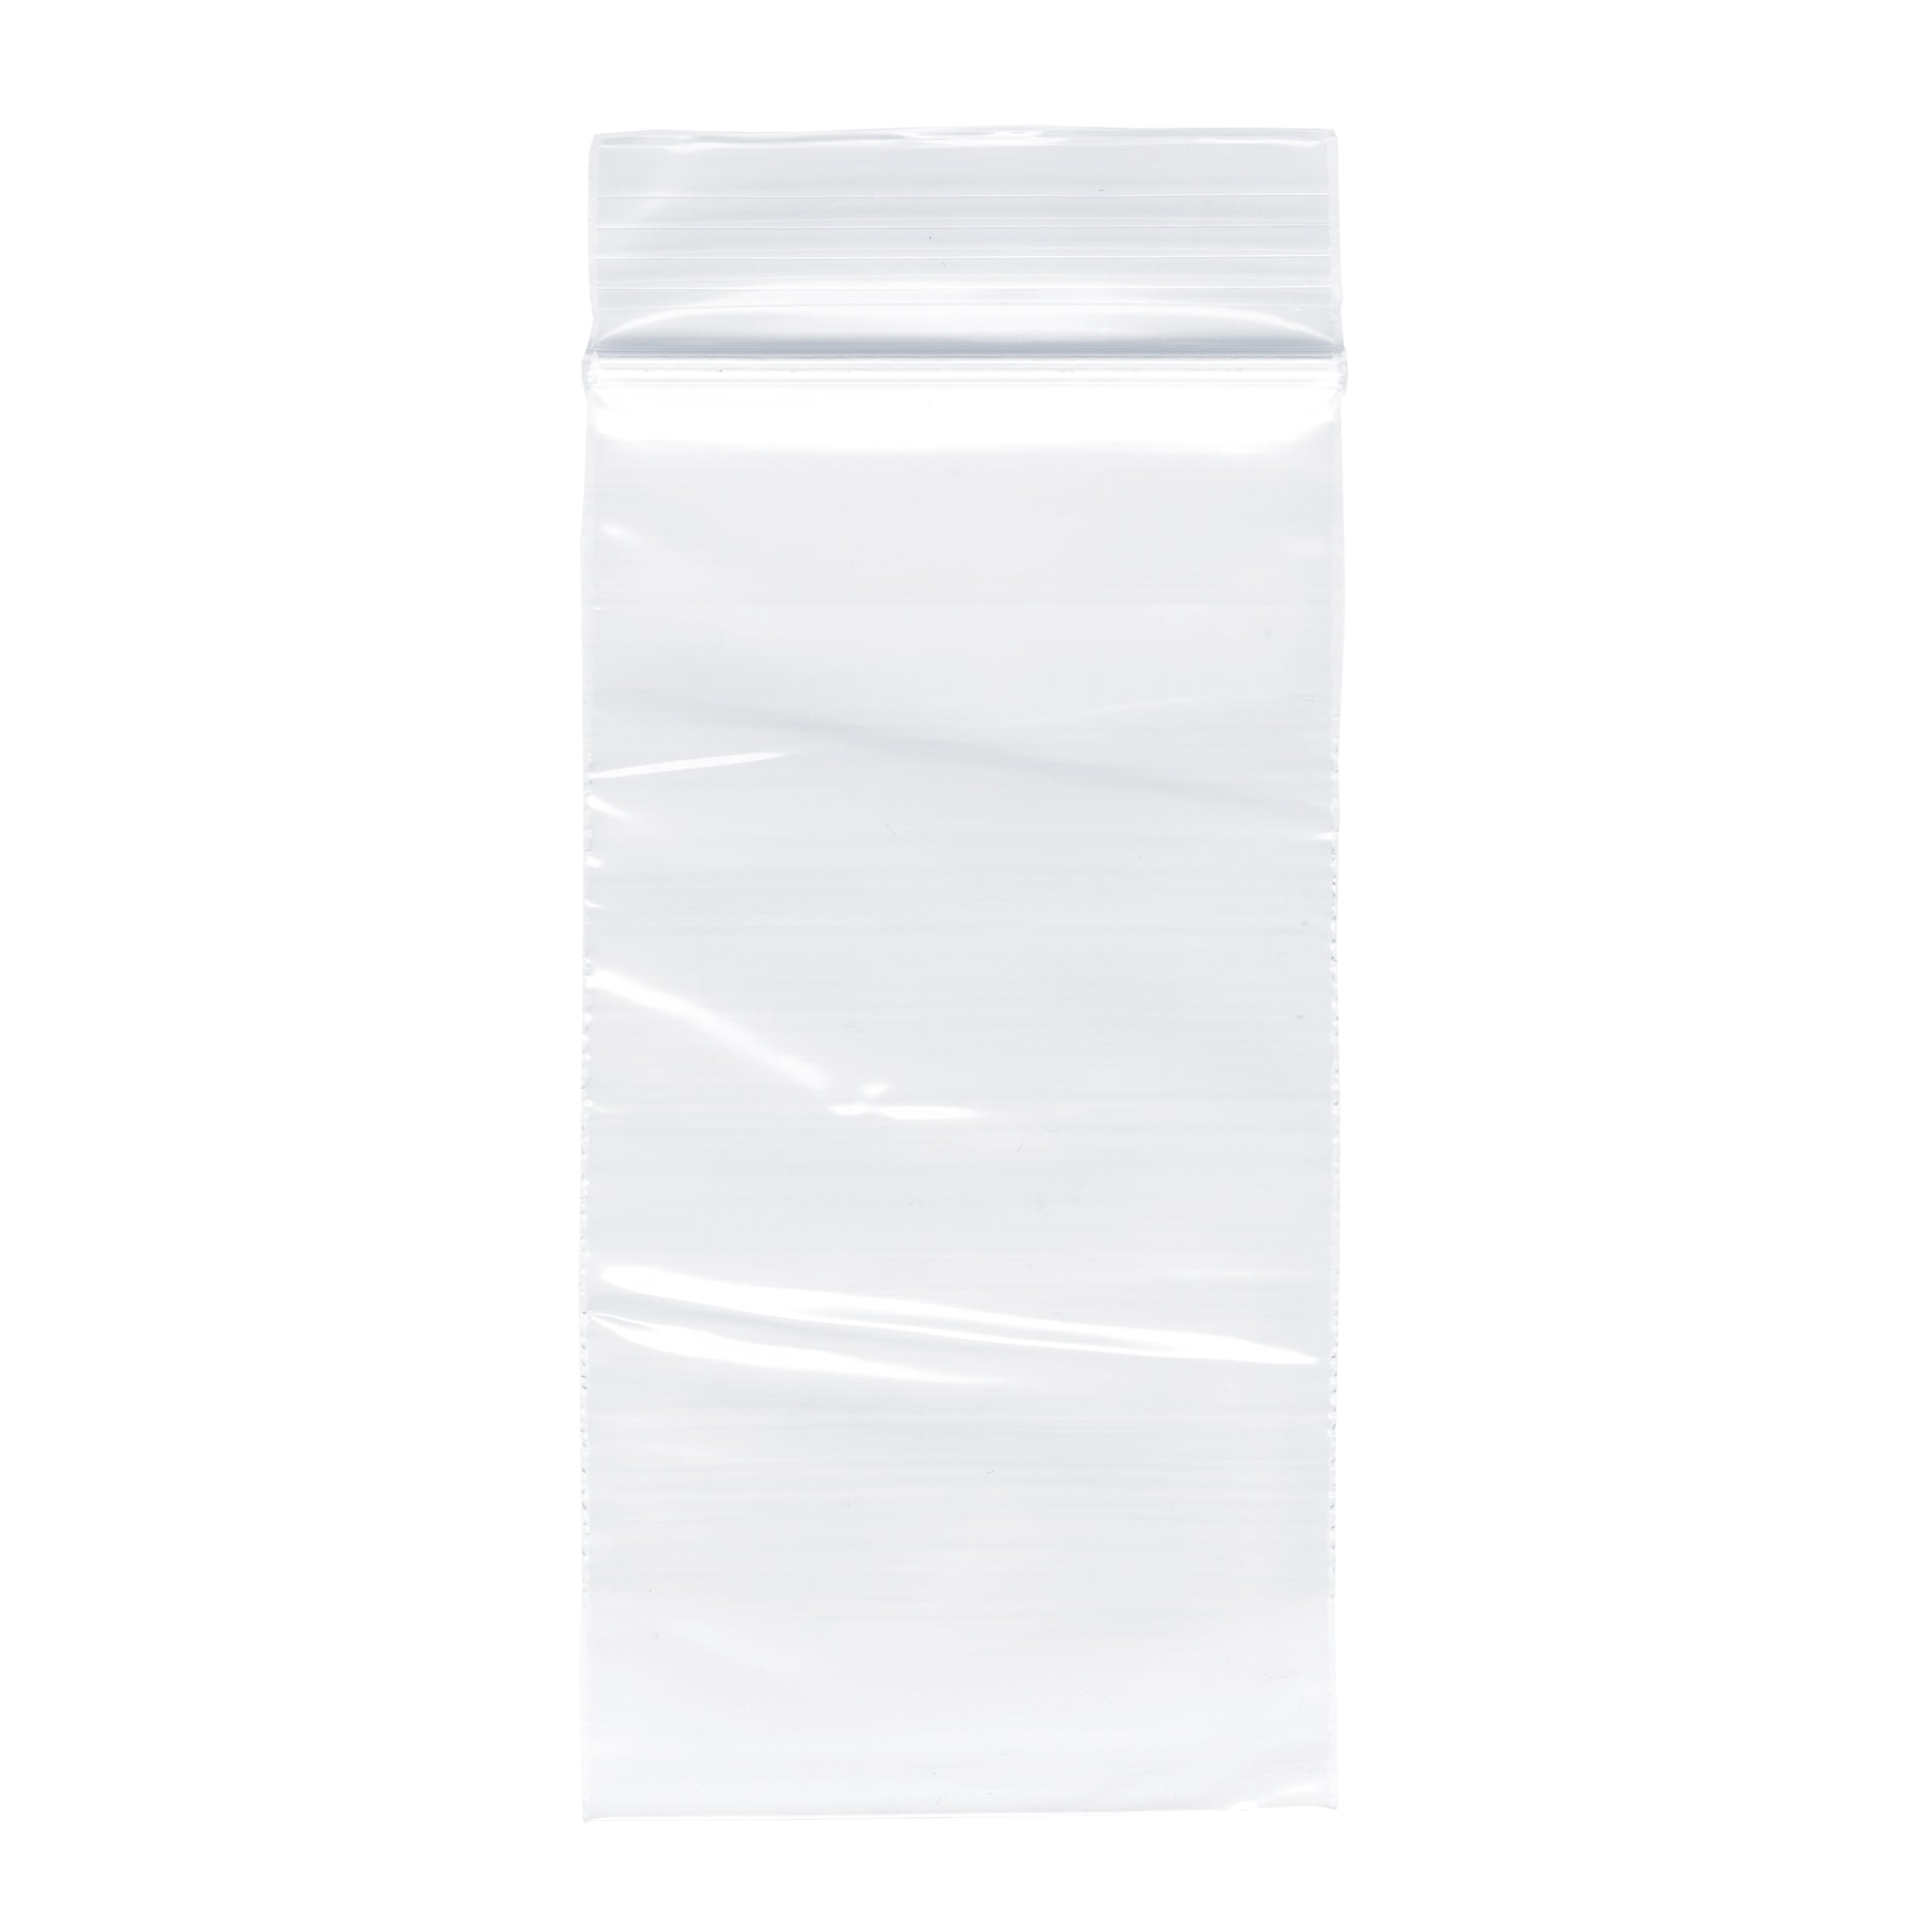 12000 Zipper Clear Reclosable Polybags 2.5" x 3" 4 Mil Retail Packing Bags 